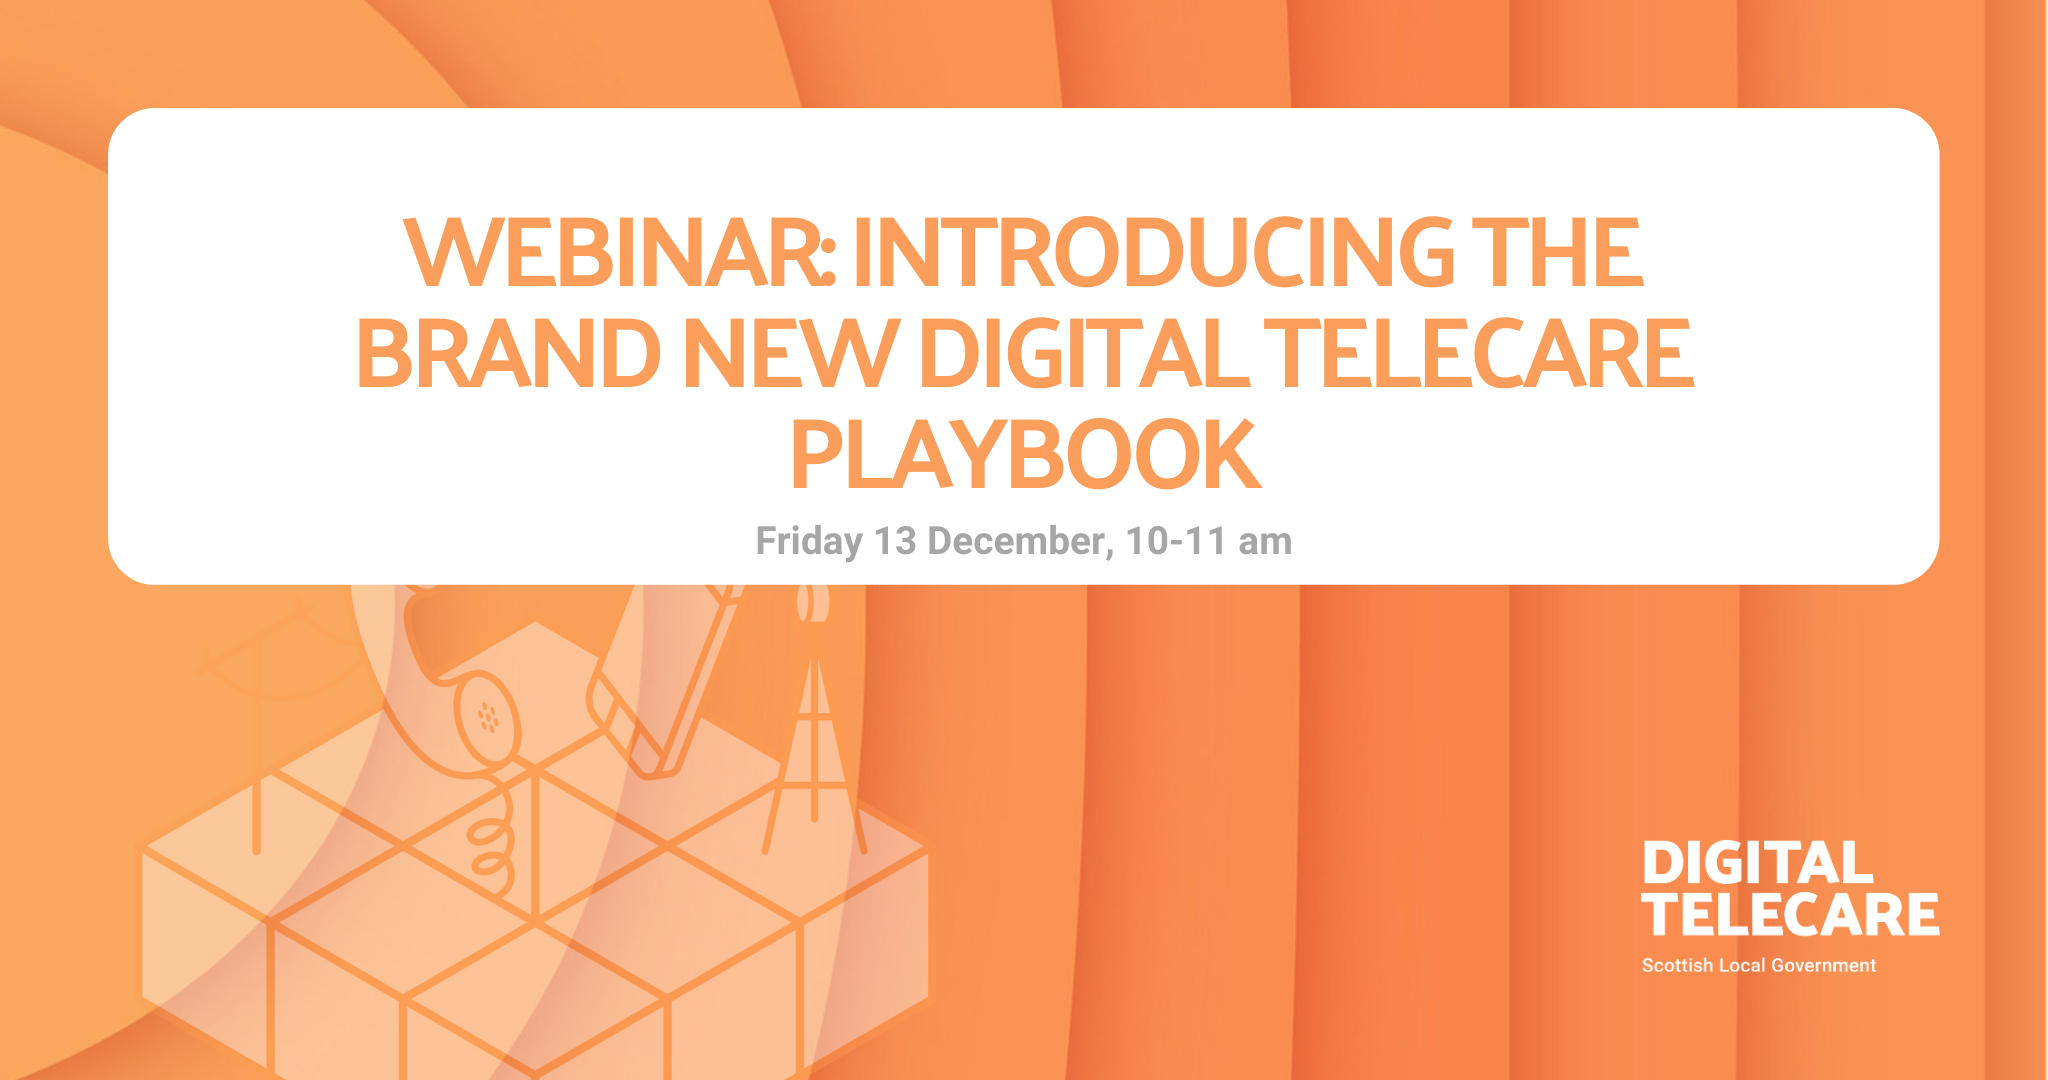  WEBINAR: PLAYBOOK LAUNCH AVAILABLE